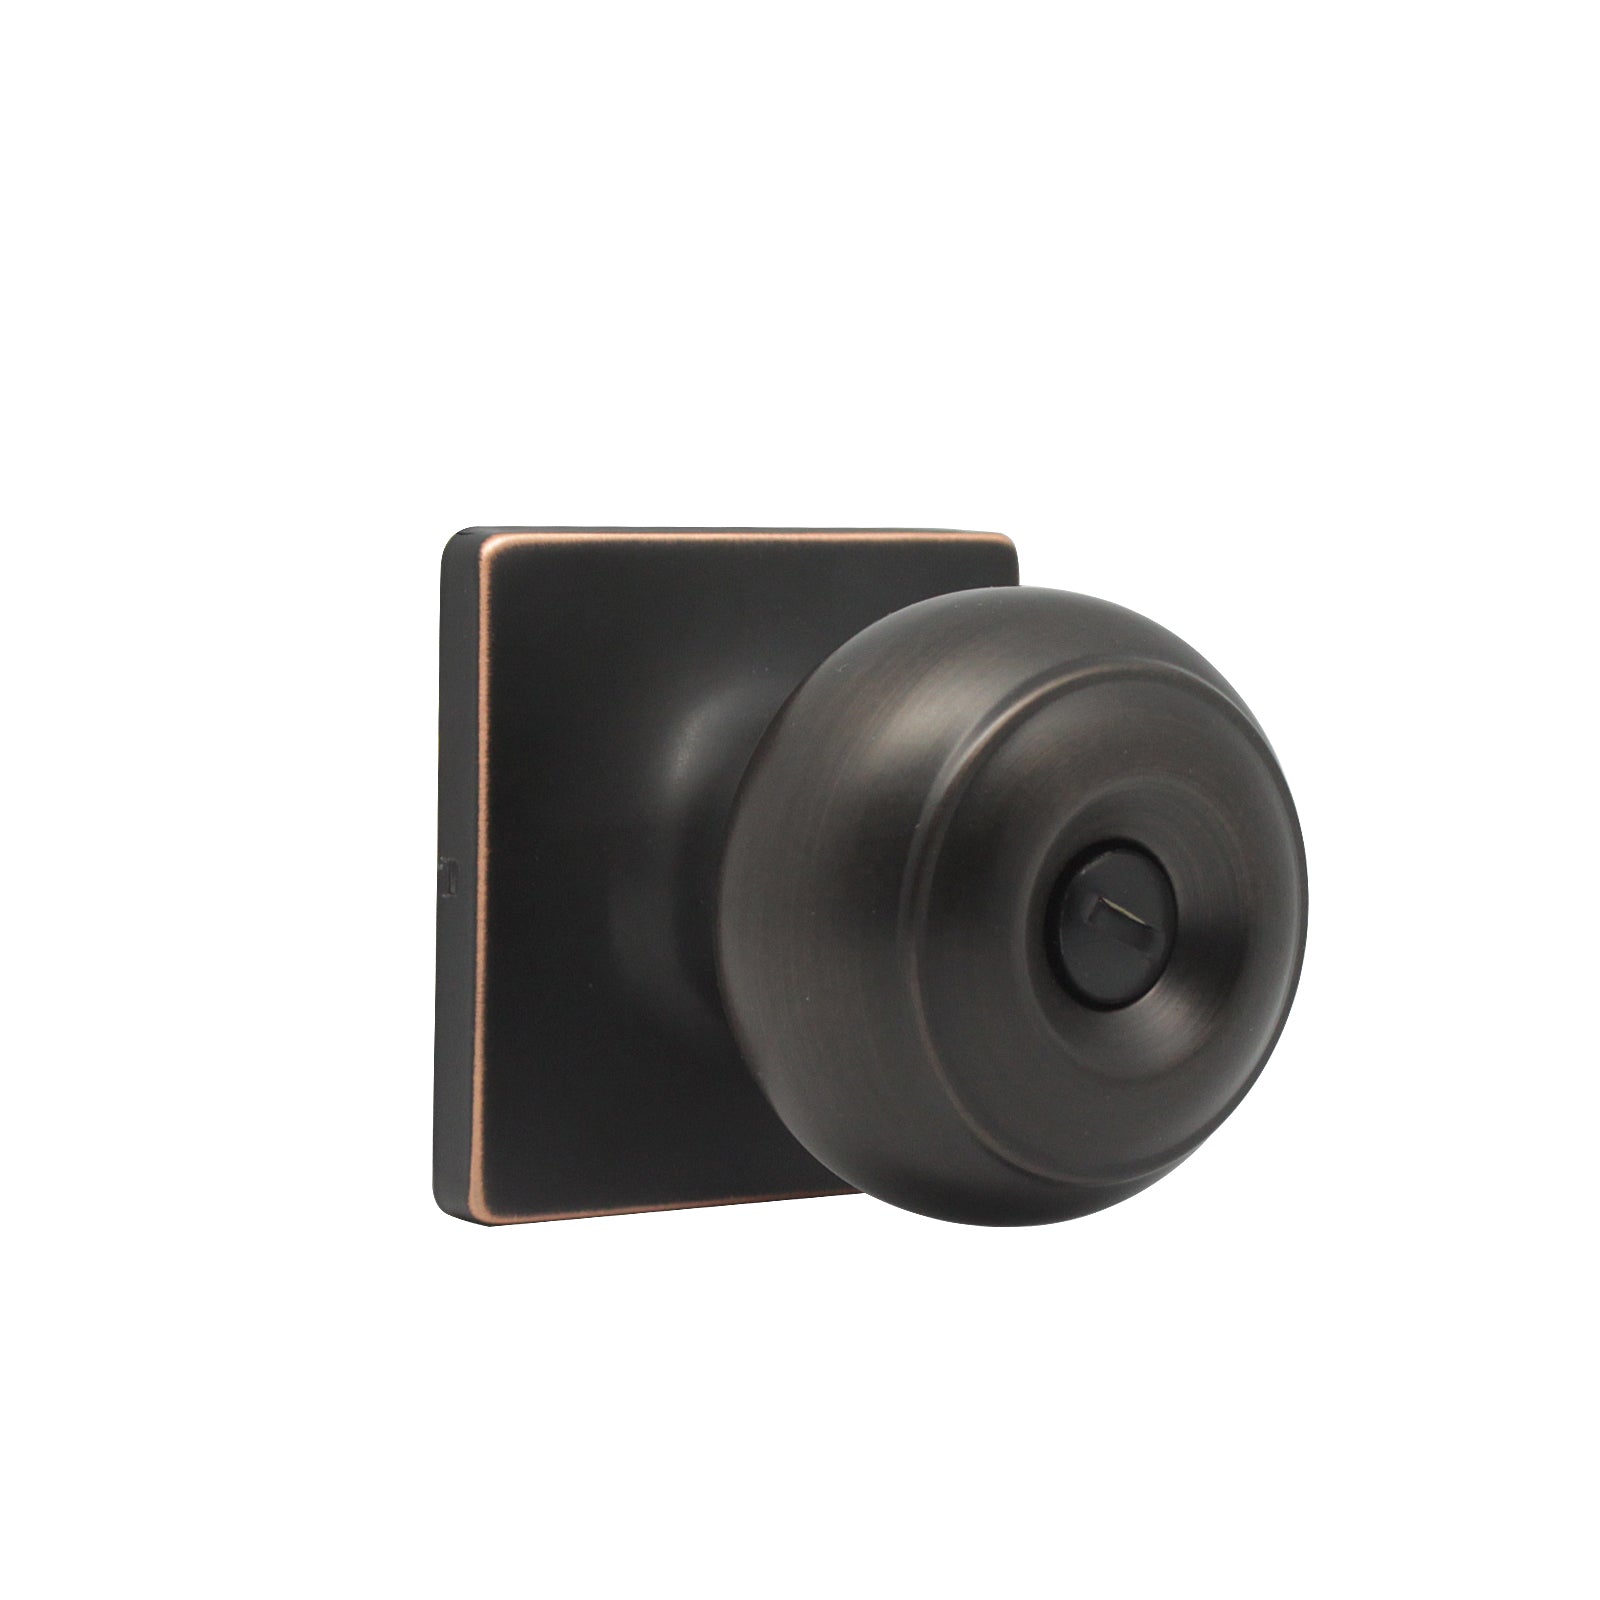 Flat Ball Knob with Square Rosette, Privacy Door Knobs Oil Rubbed Bronze Finish DLS09ORBBK - Probrico